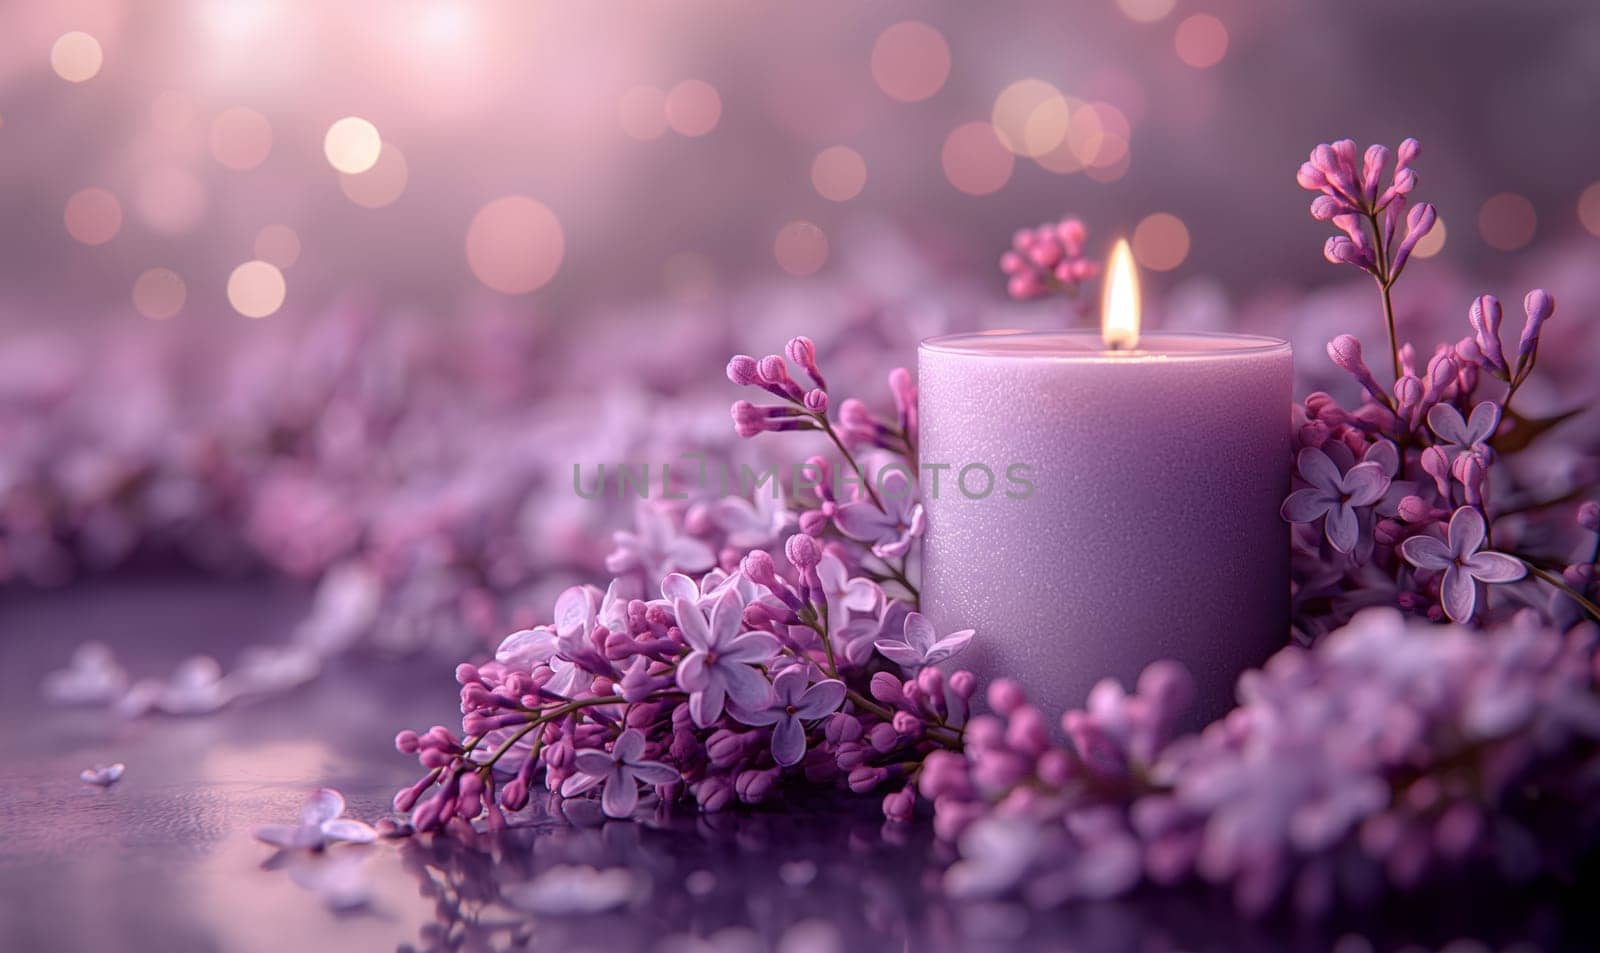 Burning candle among lilac flowers, front view. Selective focus.